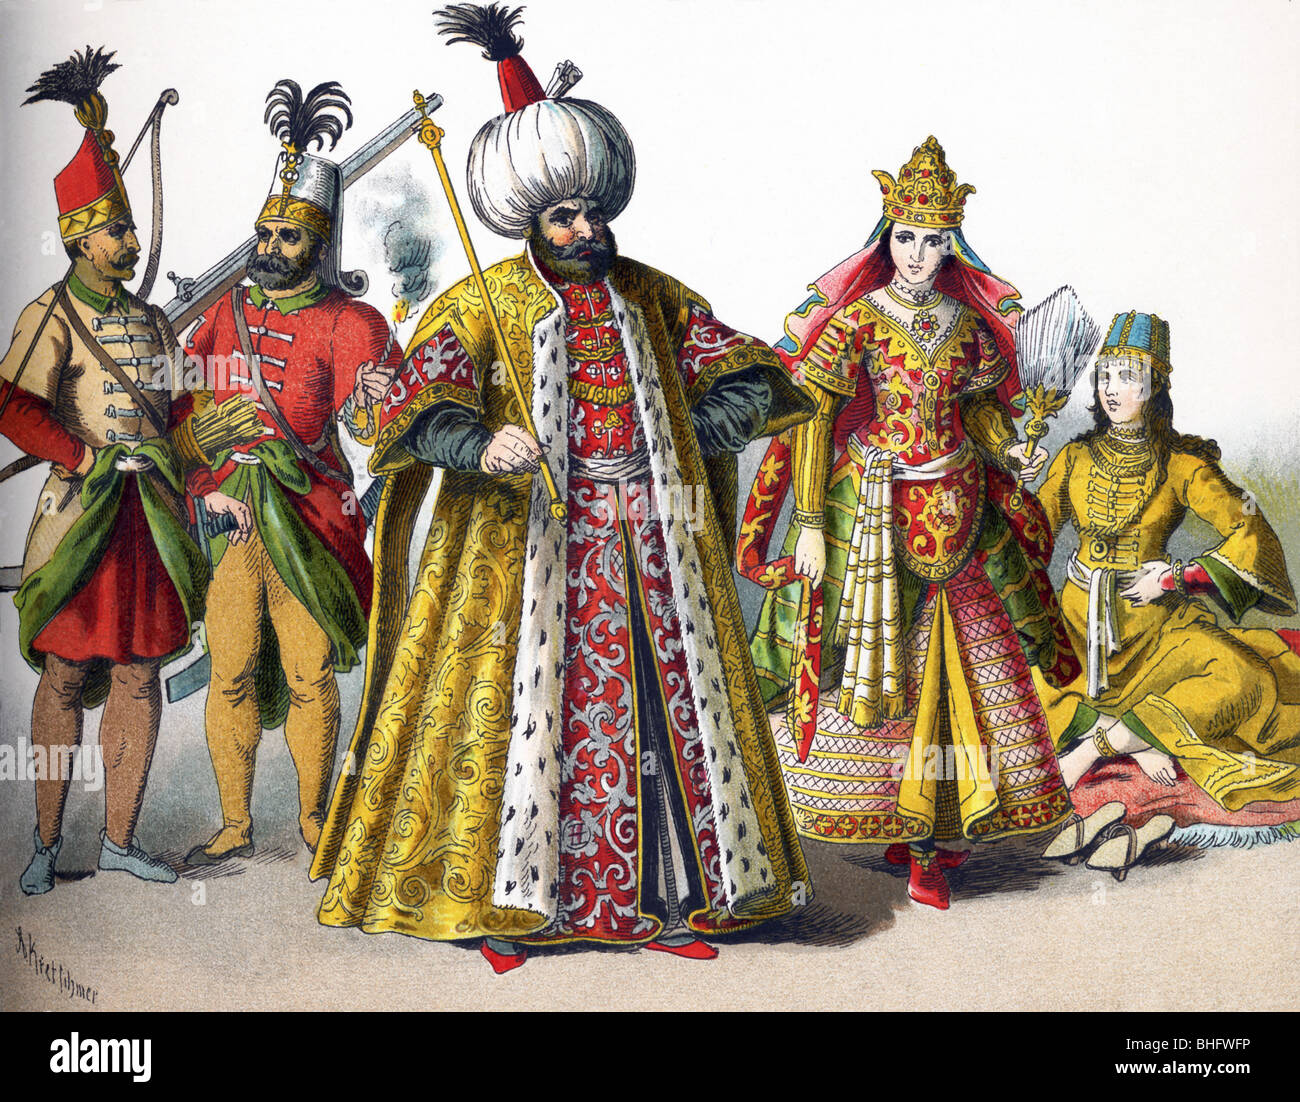 these-ottoman-empire-figures-in-1500-represent-a-guard-a-janizary-BHFWFP.jpg